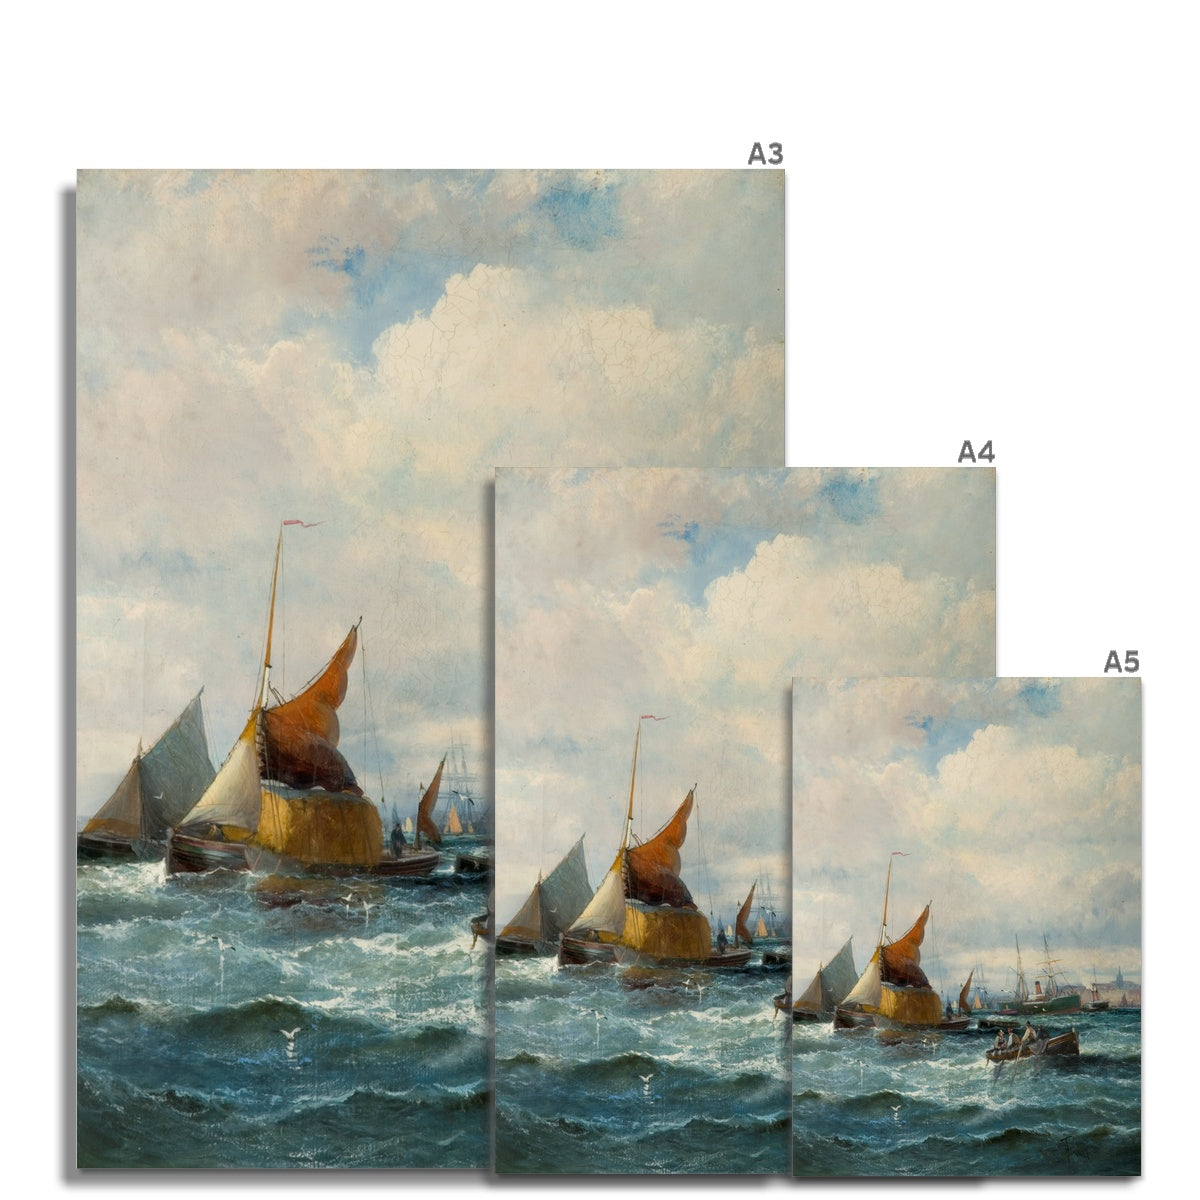 Fine Art Print - Shipping off a Headland by Georges Thornley